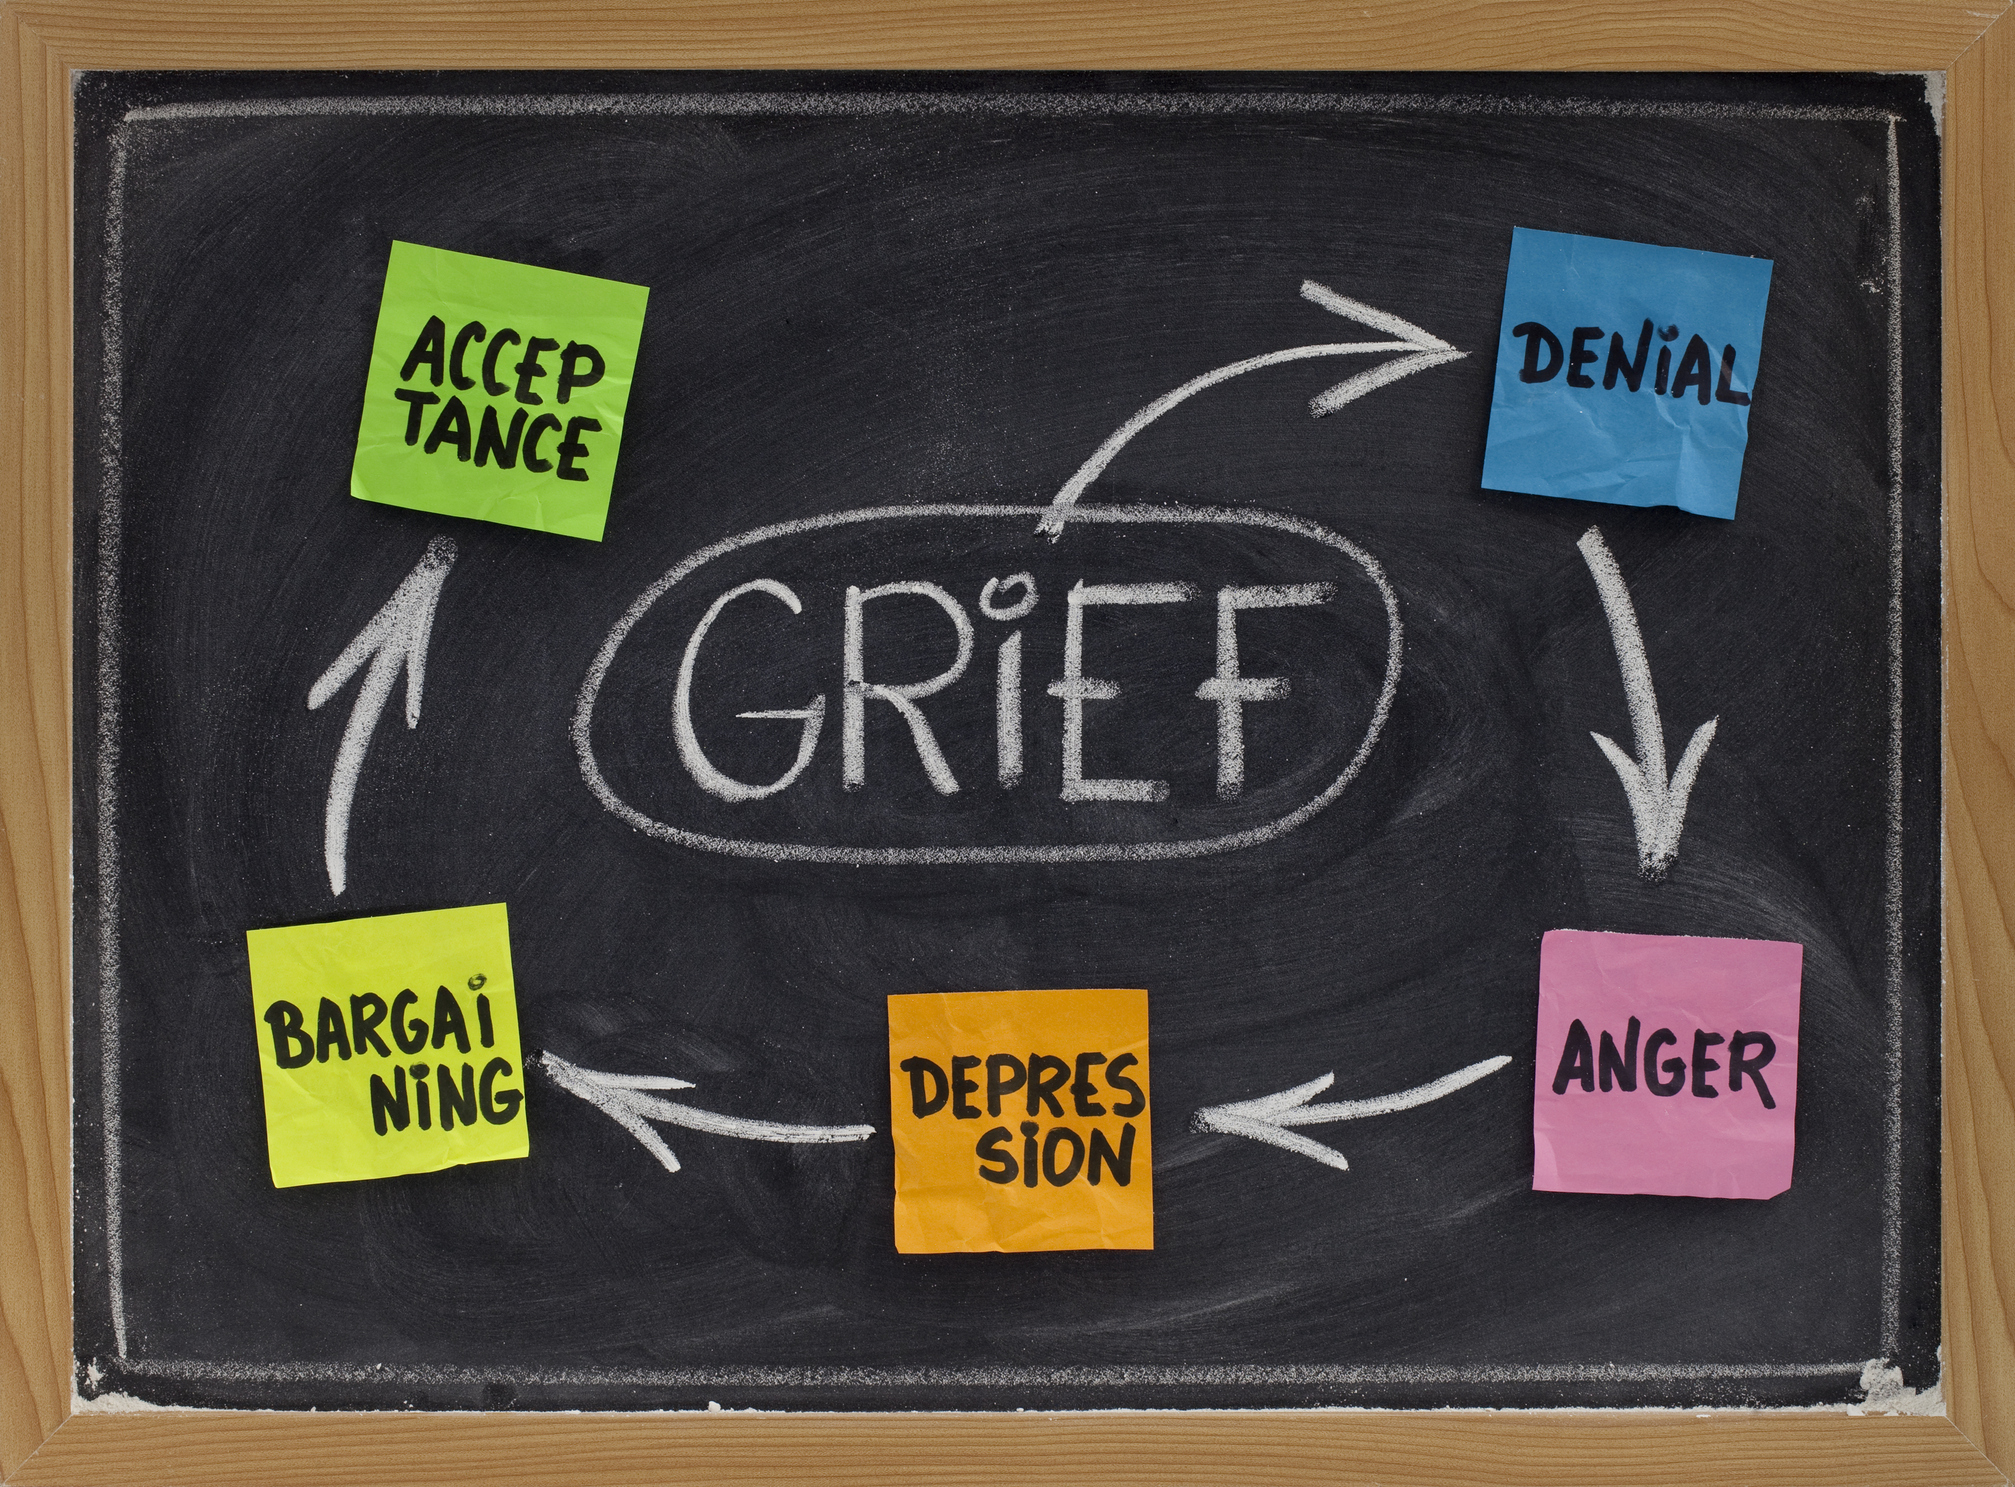 Psychological Counseling for Grief and Loss - near Davie Florida, near NSU University